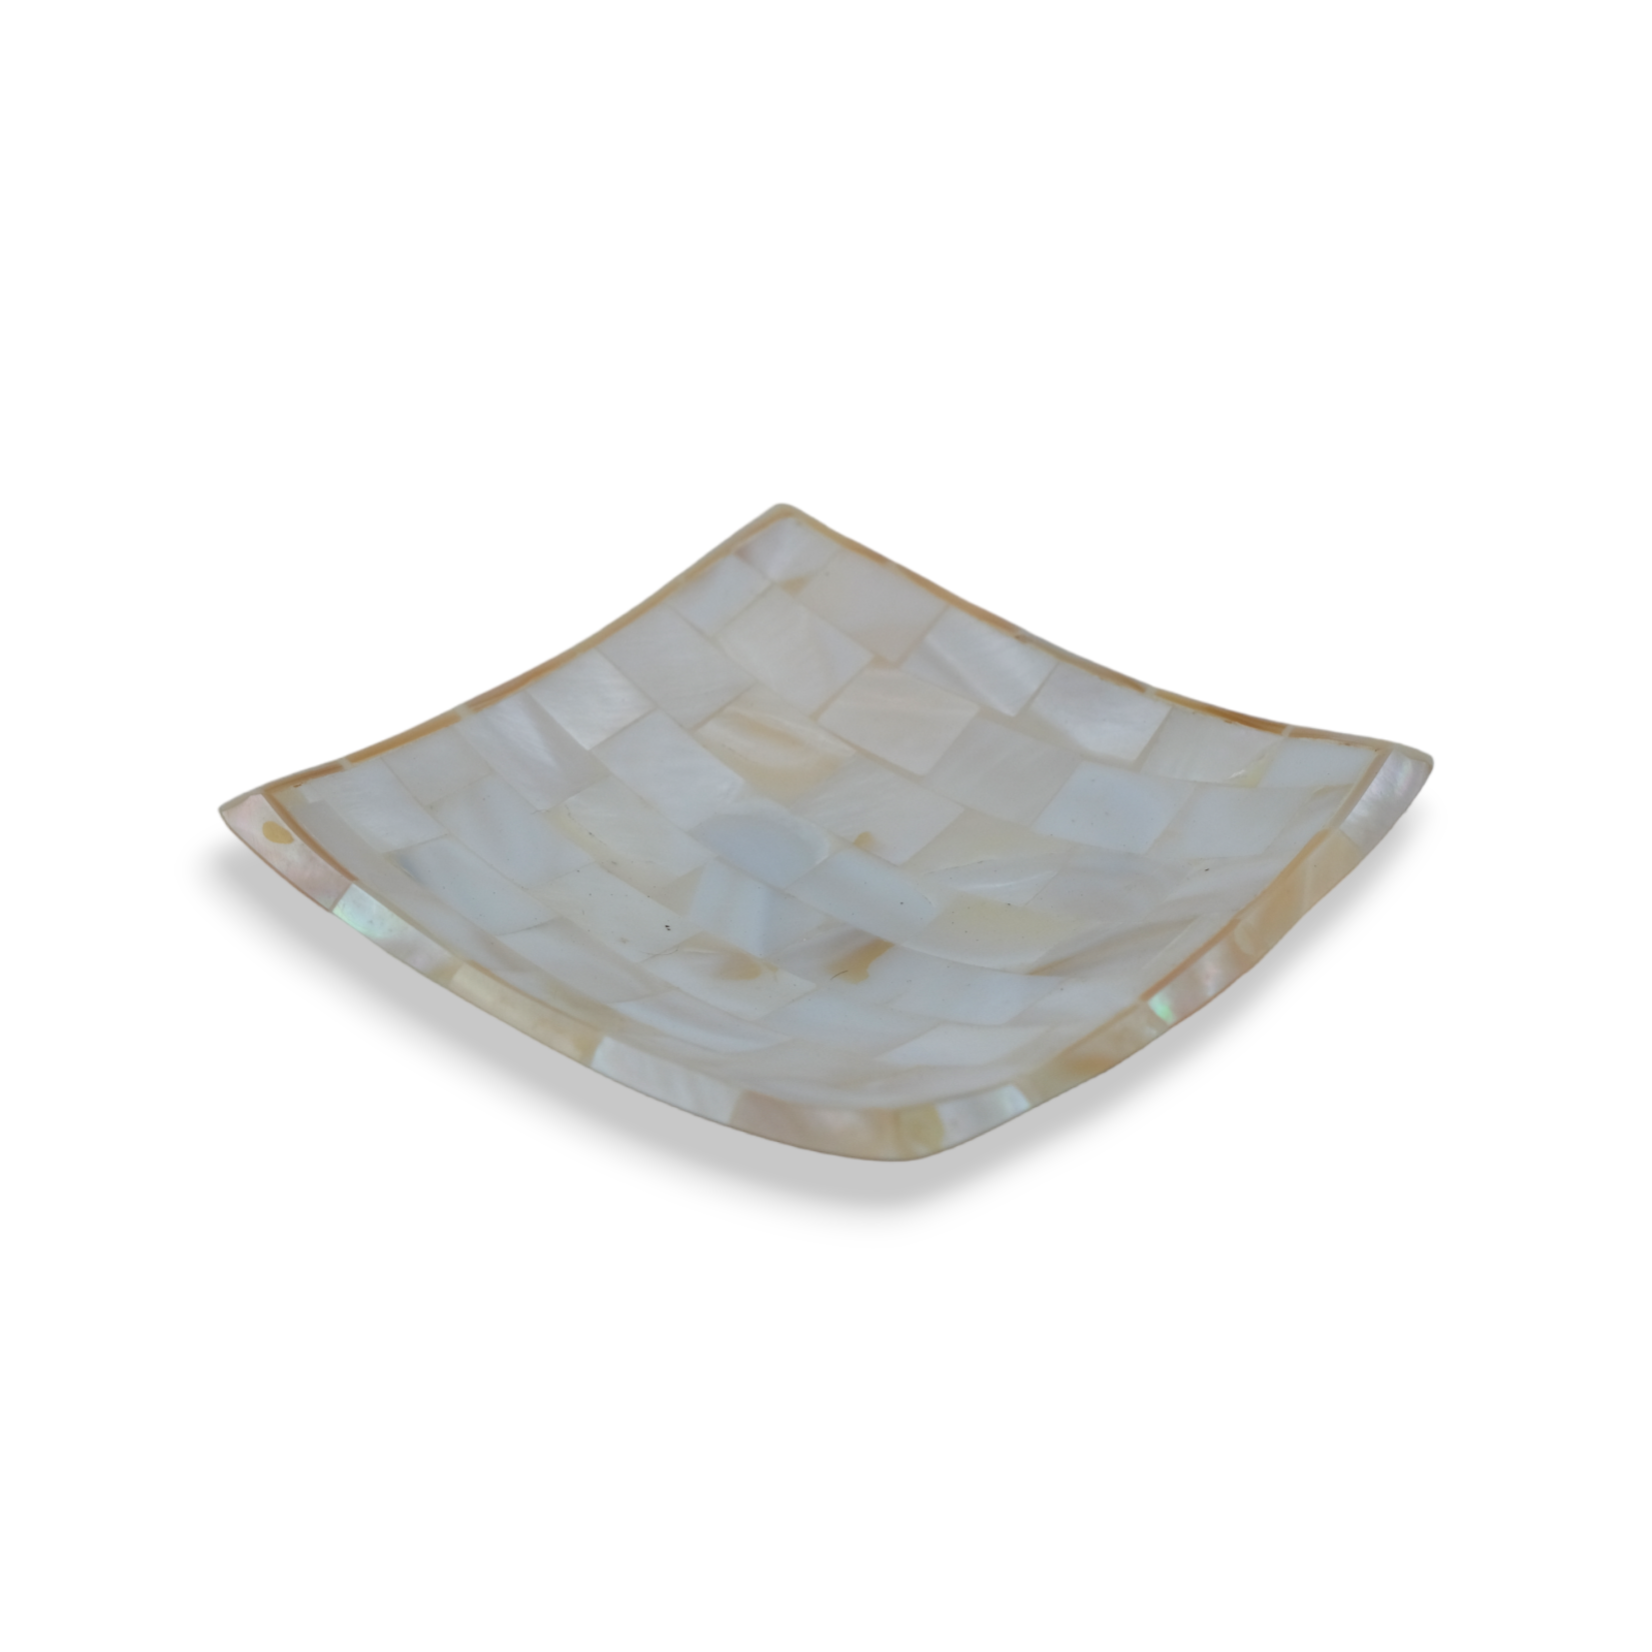 Handmade Mother of Pearl Mosaic Square Dish  8cm